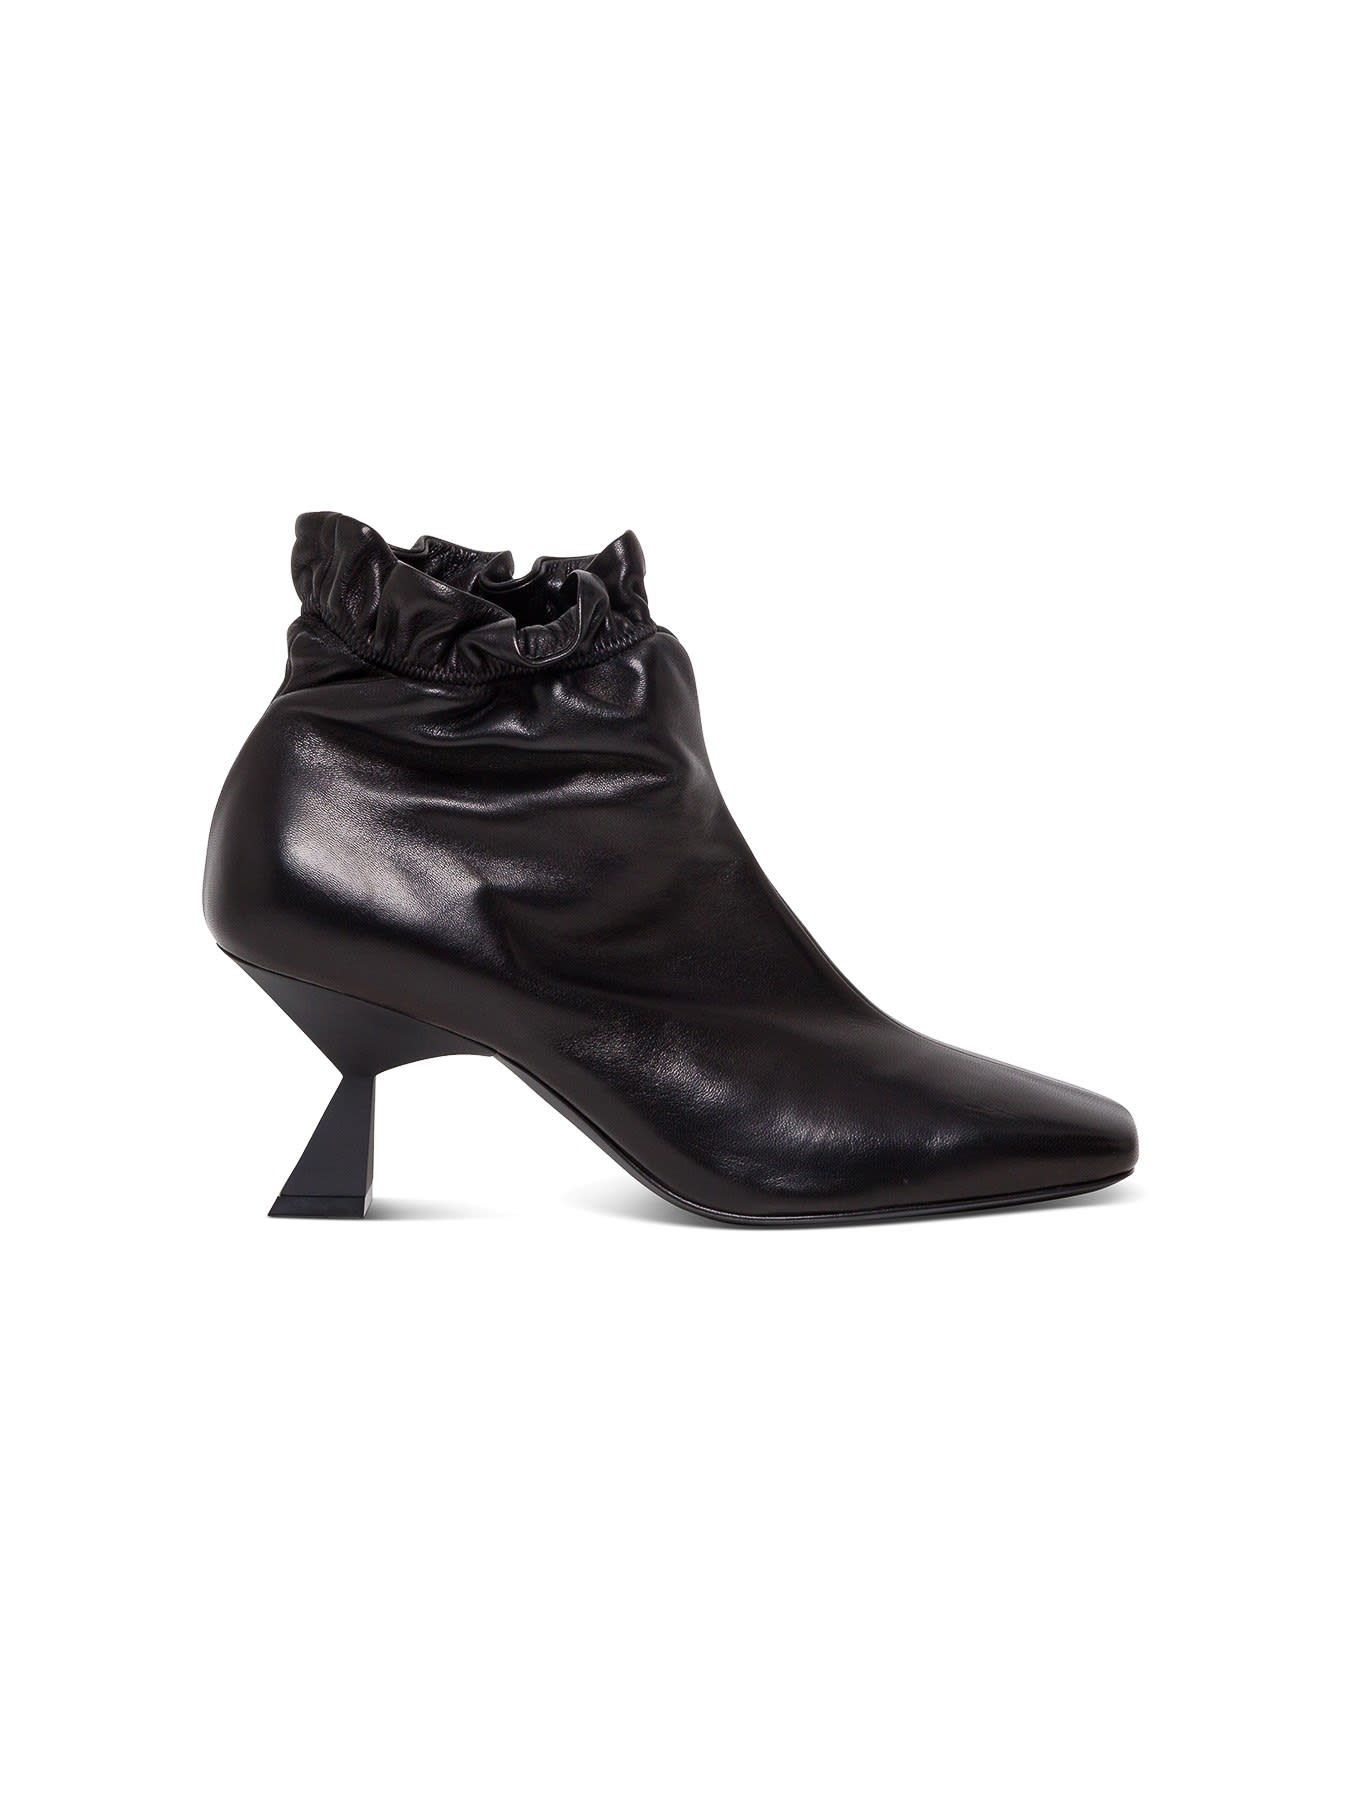 Givenchy Square-toe 75mm Ankle Boots